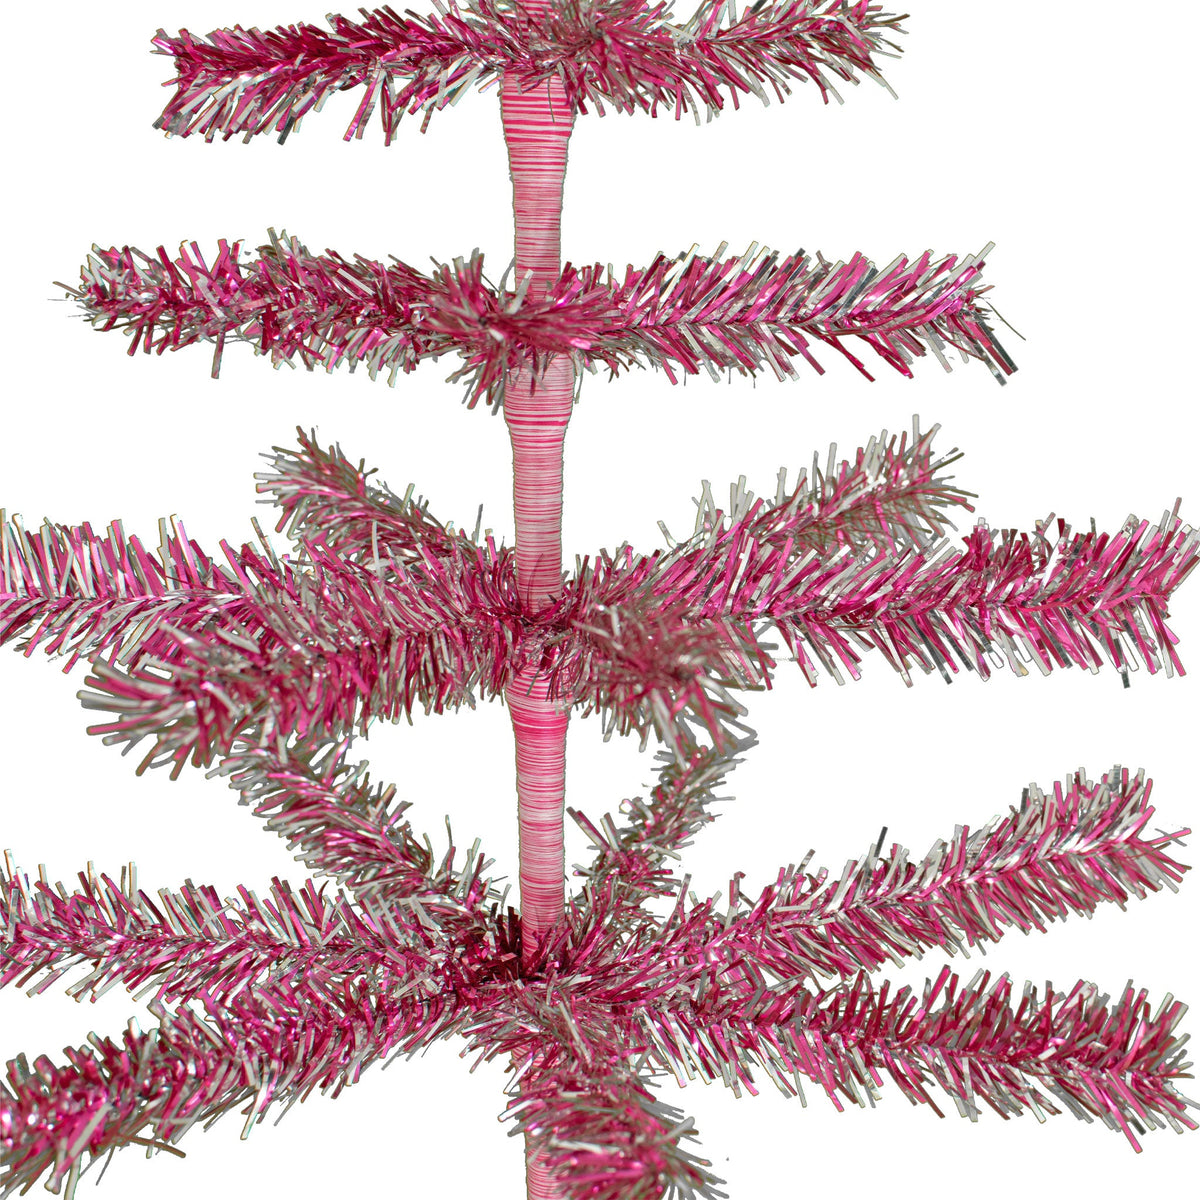 Flame Resistant Vinyl Tinsel Brush - Indoor & Outdoor Safe.  Decorate indoors as table-top displays and centerpieces or use outdoors without worrying about weather damage.